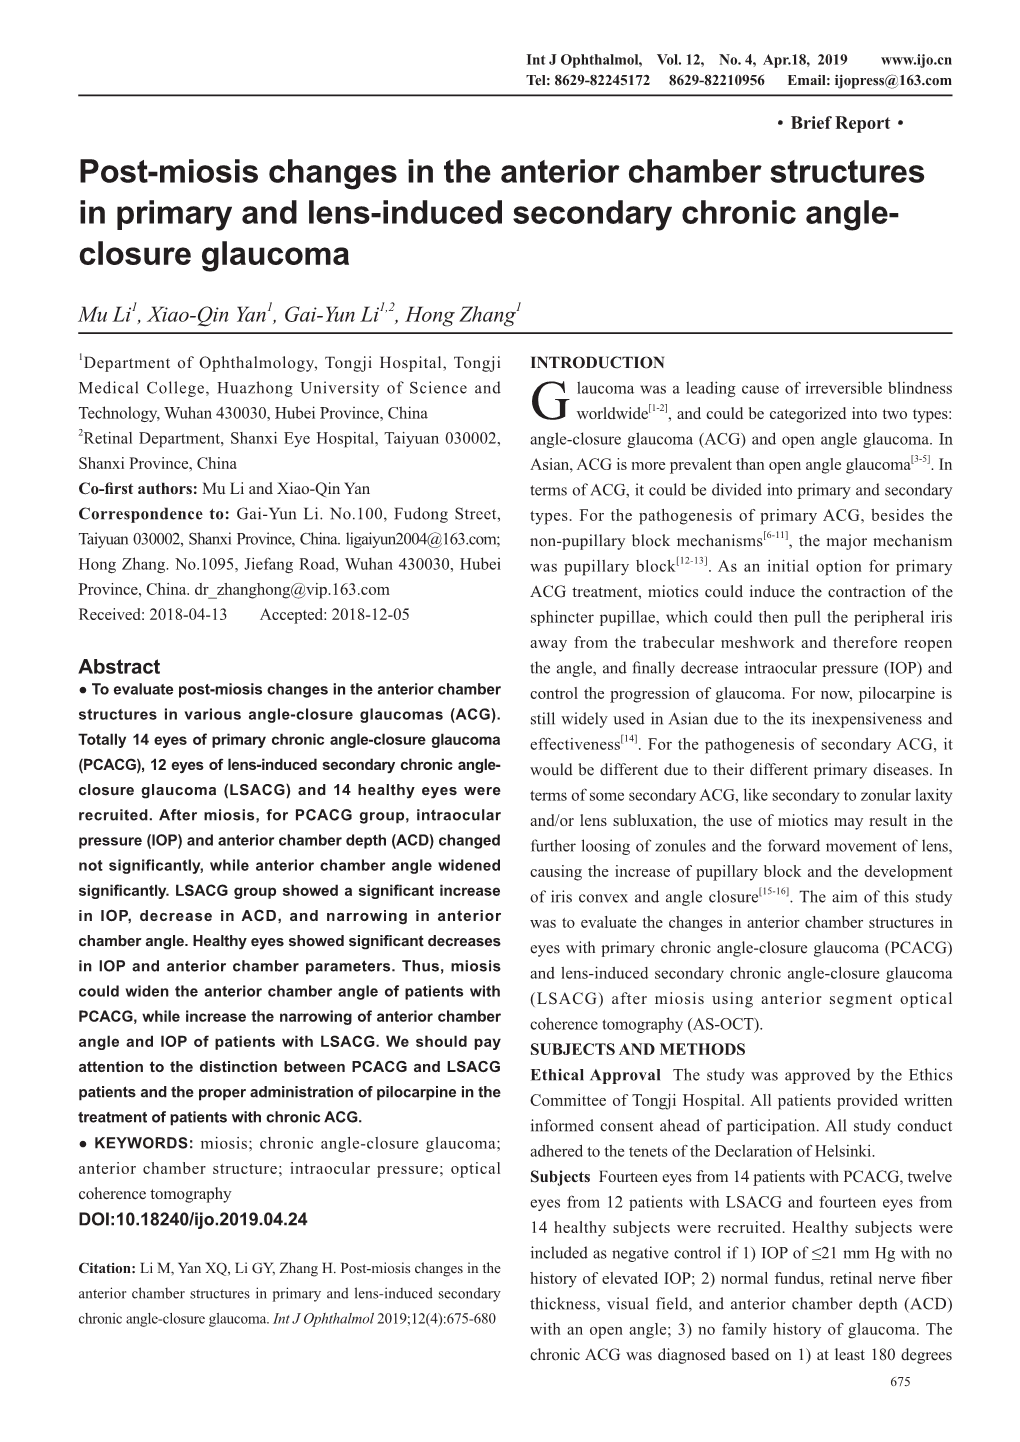 Post-Miosis Changes in the Anterior Chamber Structures in Primary and Lens-Induced Secondary Chronic Angle- Closure Glaucoma